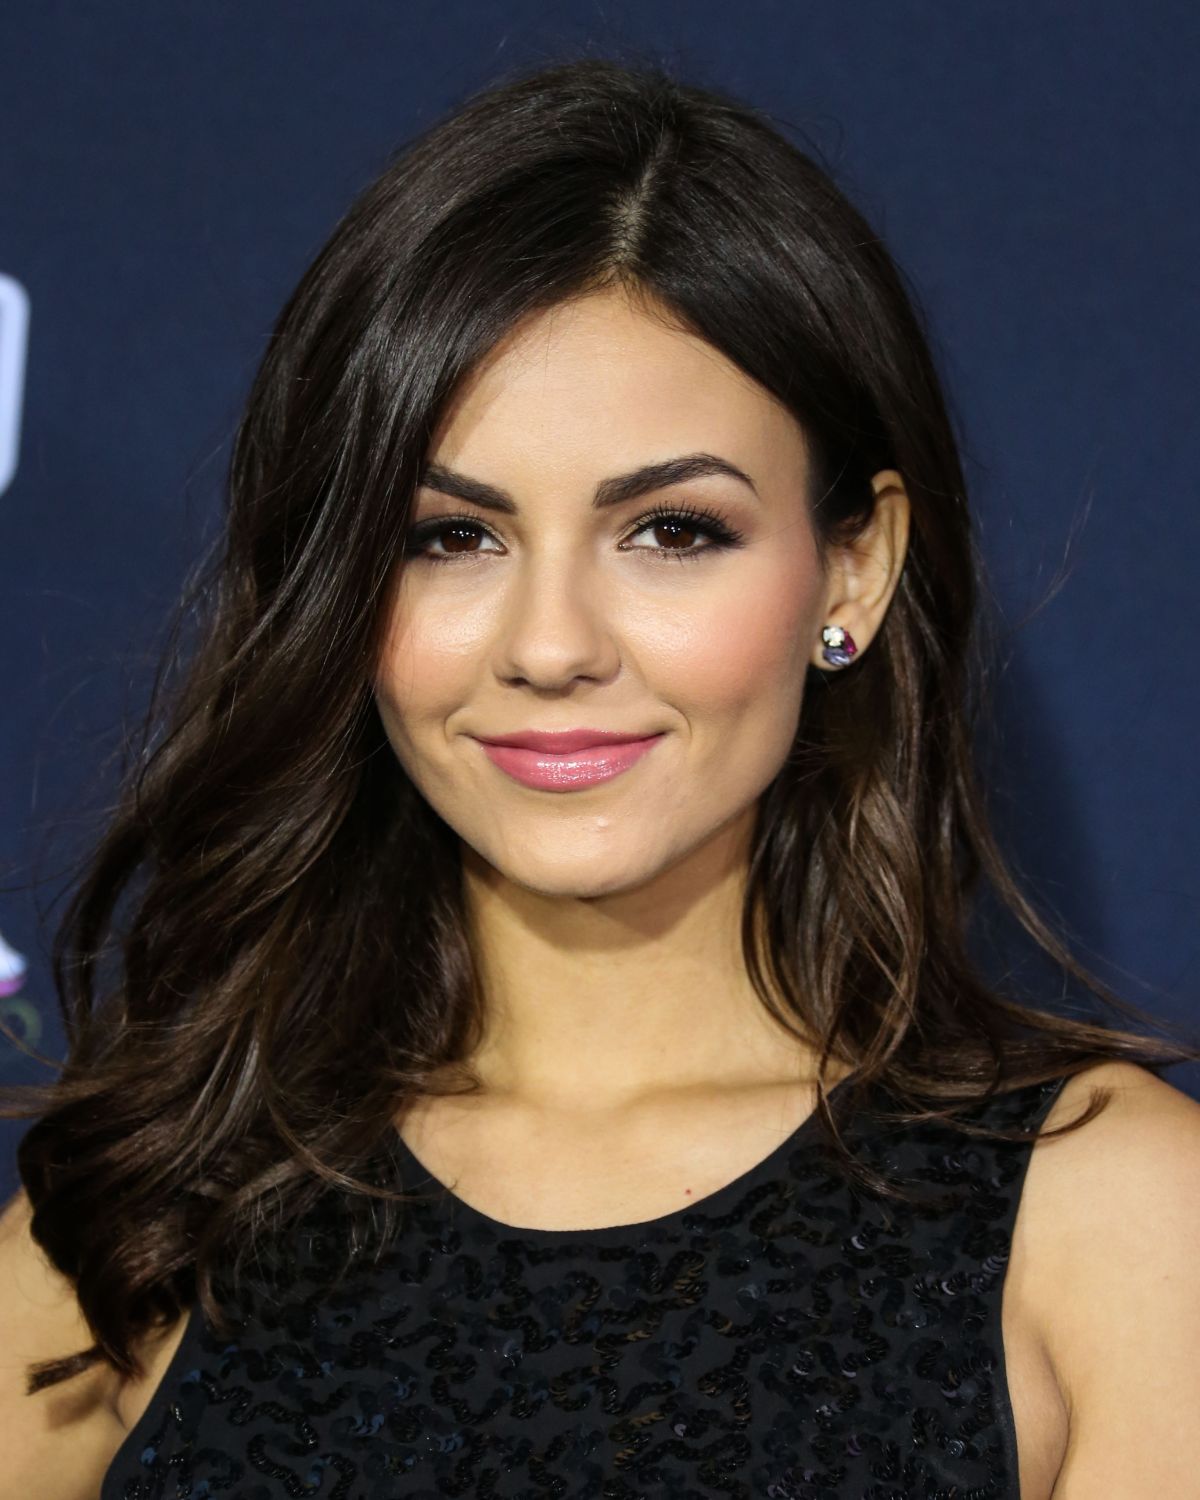 VICTORIA JUSTICE at Pitch Perfect 2 Premiere in Los Angeles – HawtCelebs